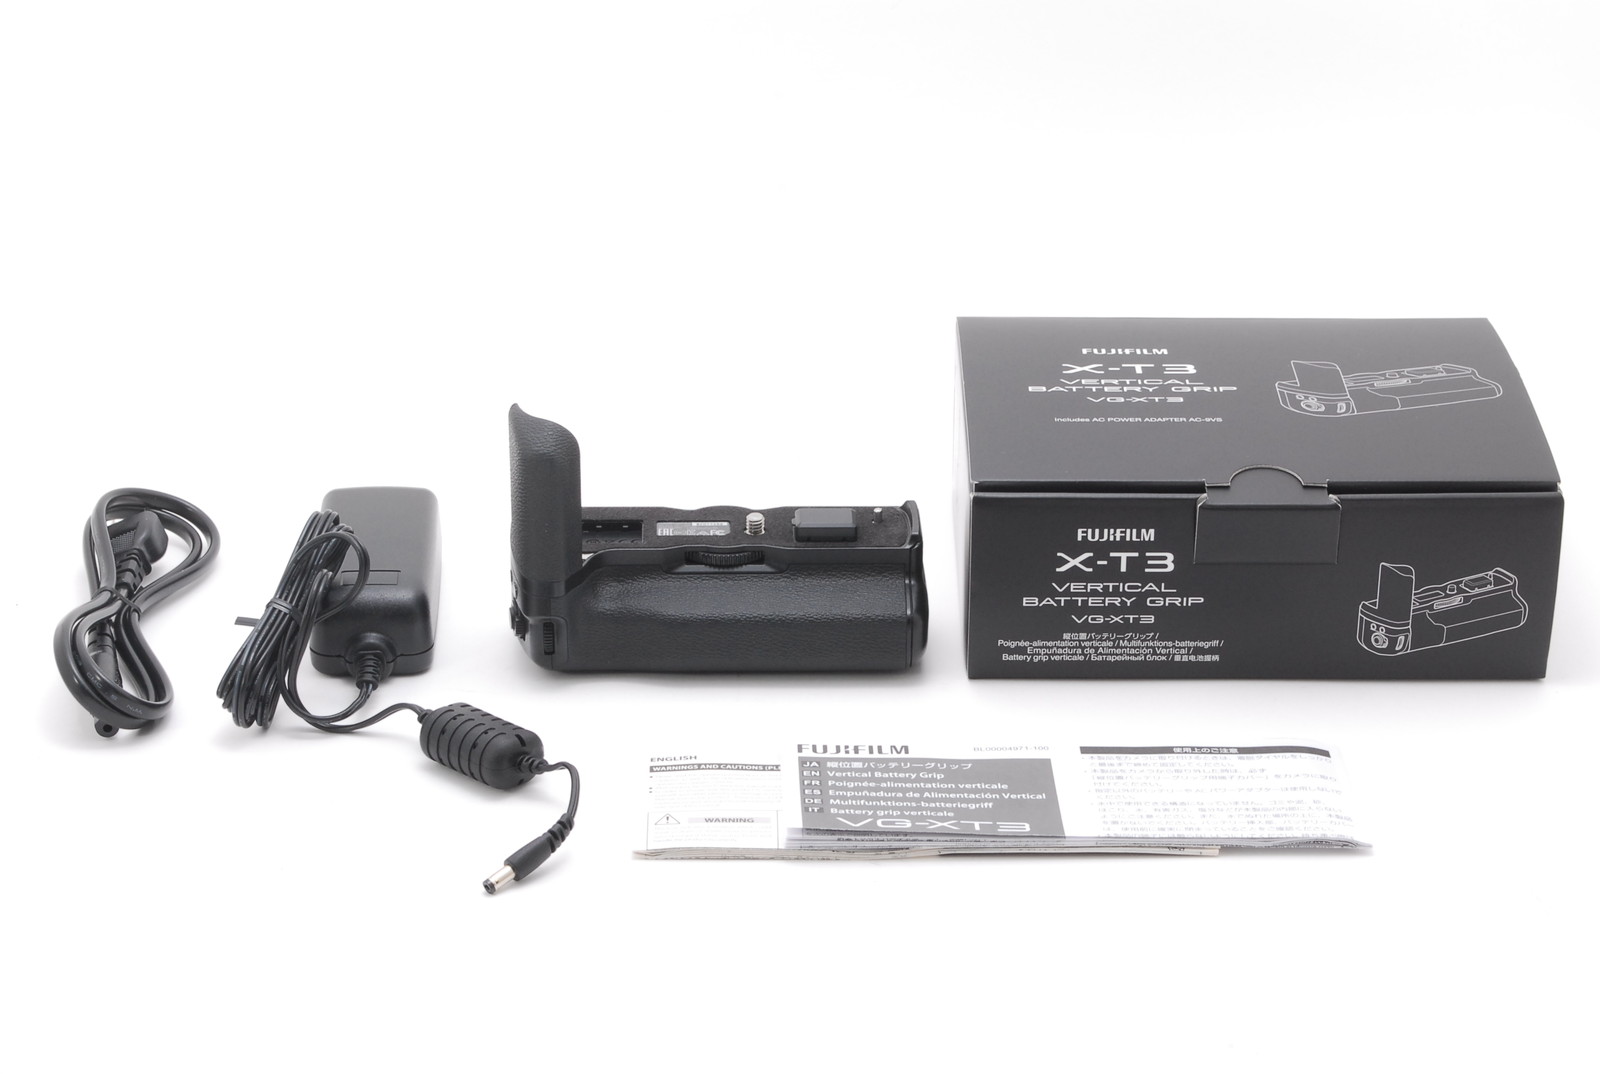 PROMOTION. MINT Fuji Fujifilm VG-XT3 Vertical Battery Grip for X-T3, Box, Manual, Charger from Japan